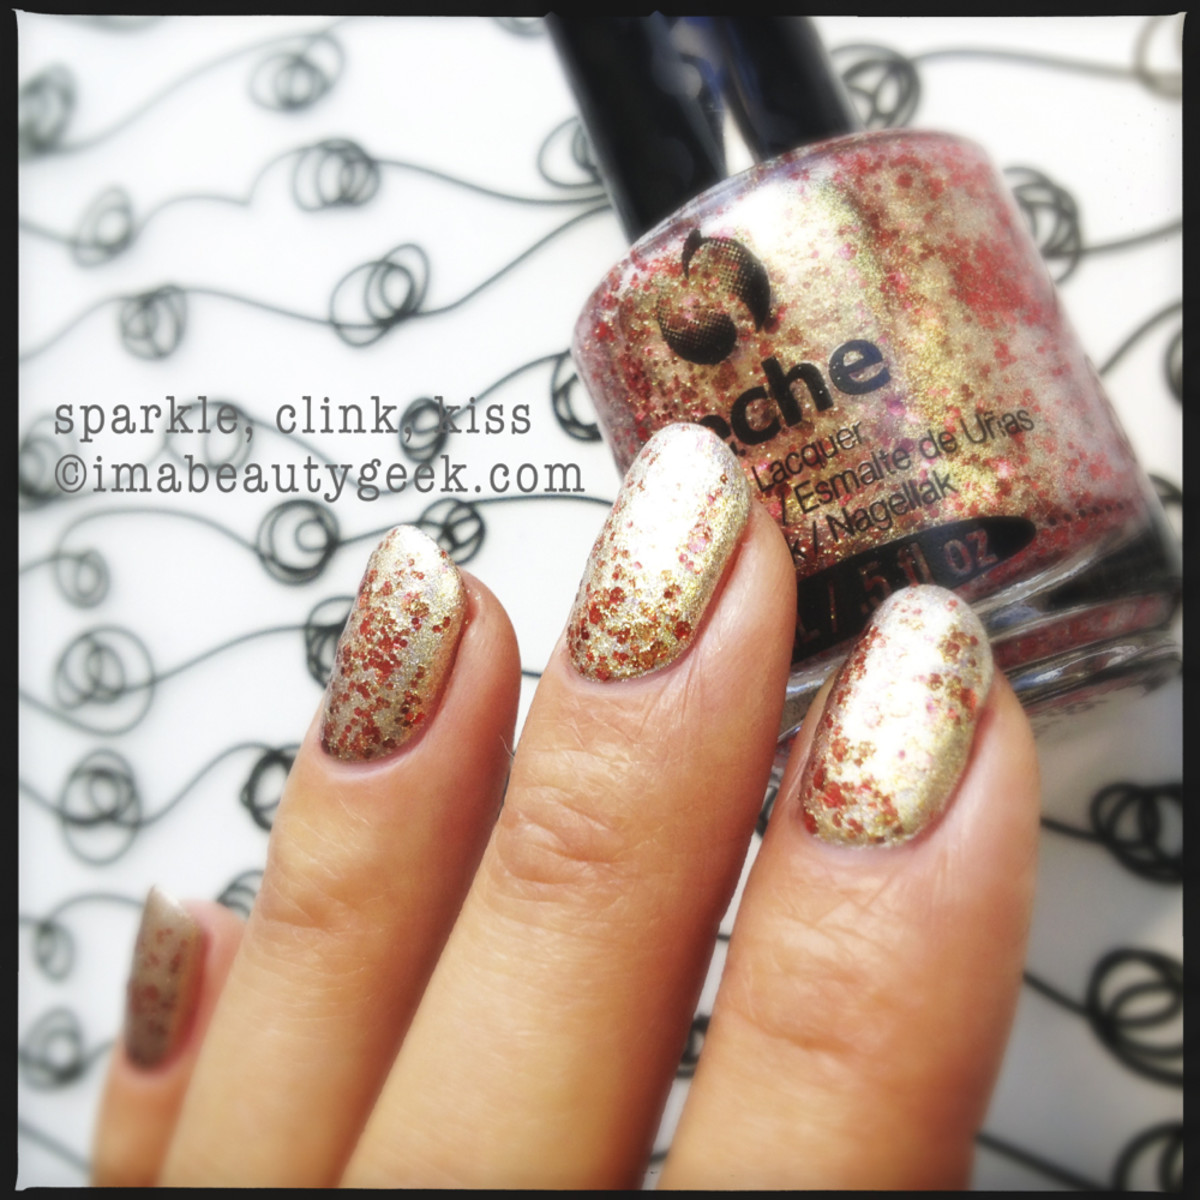 Seche Sparke, Clink, Kiss - Gracious & Kind Collection 2013